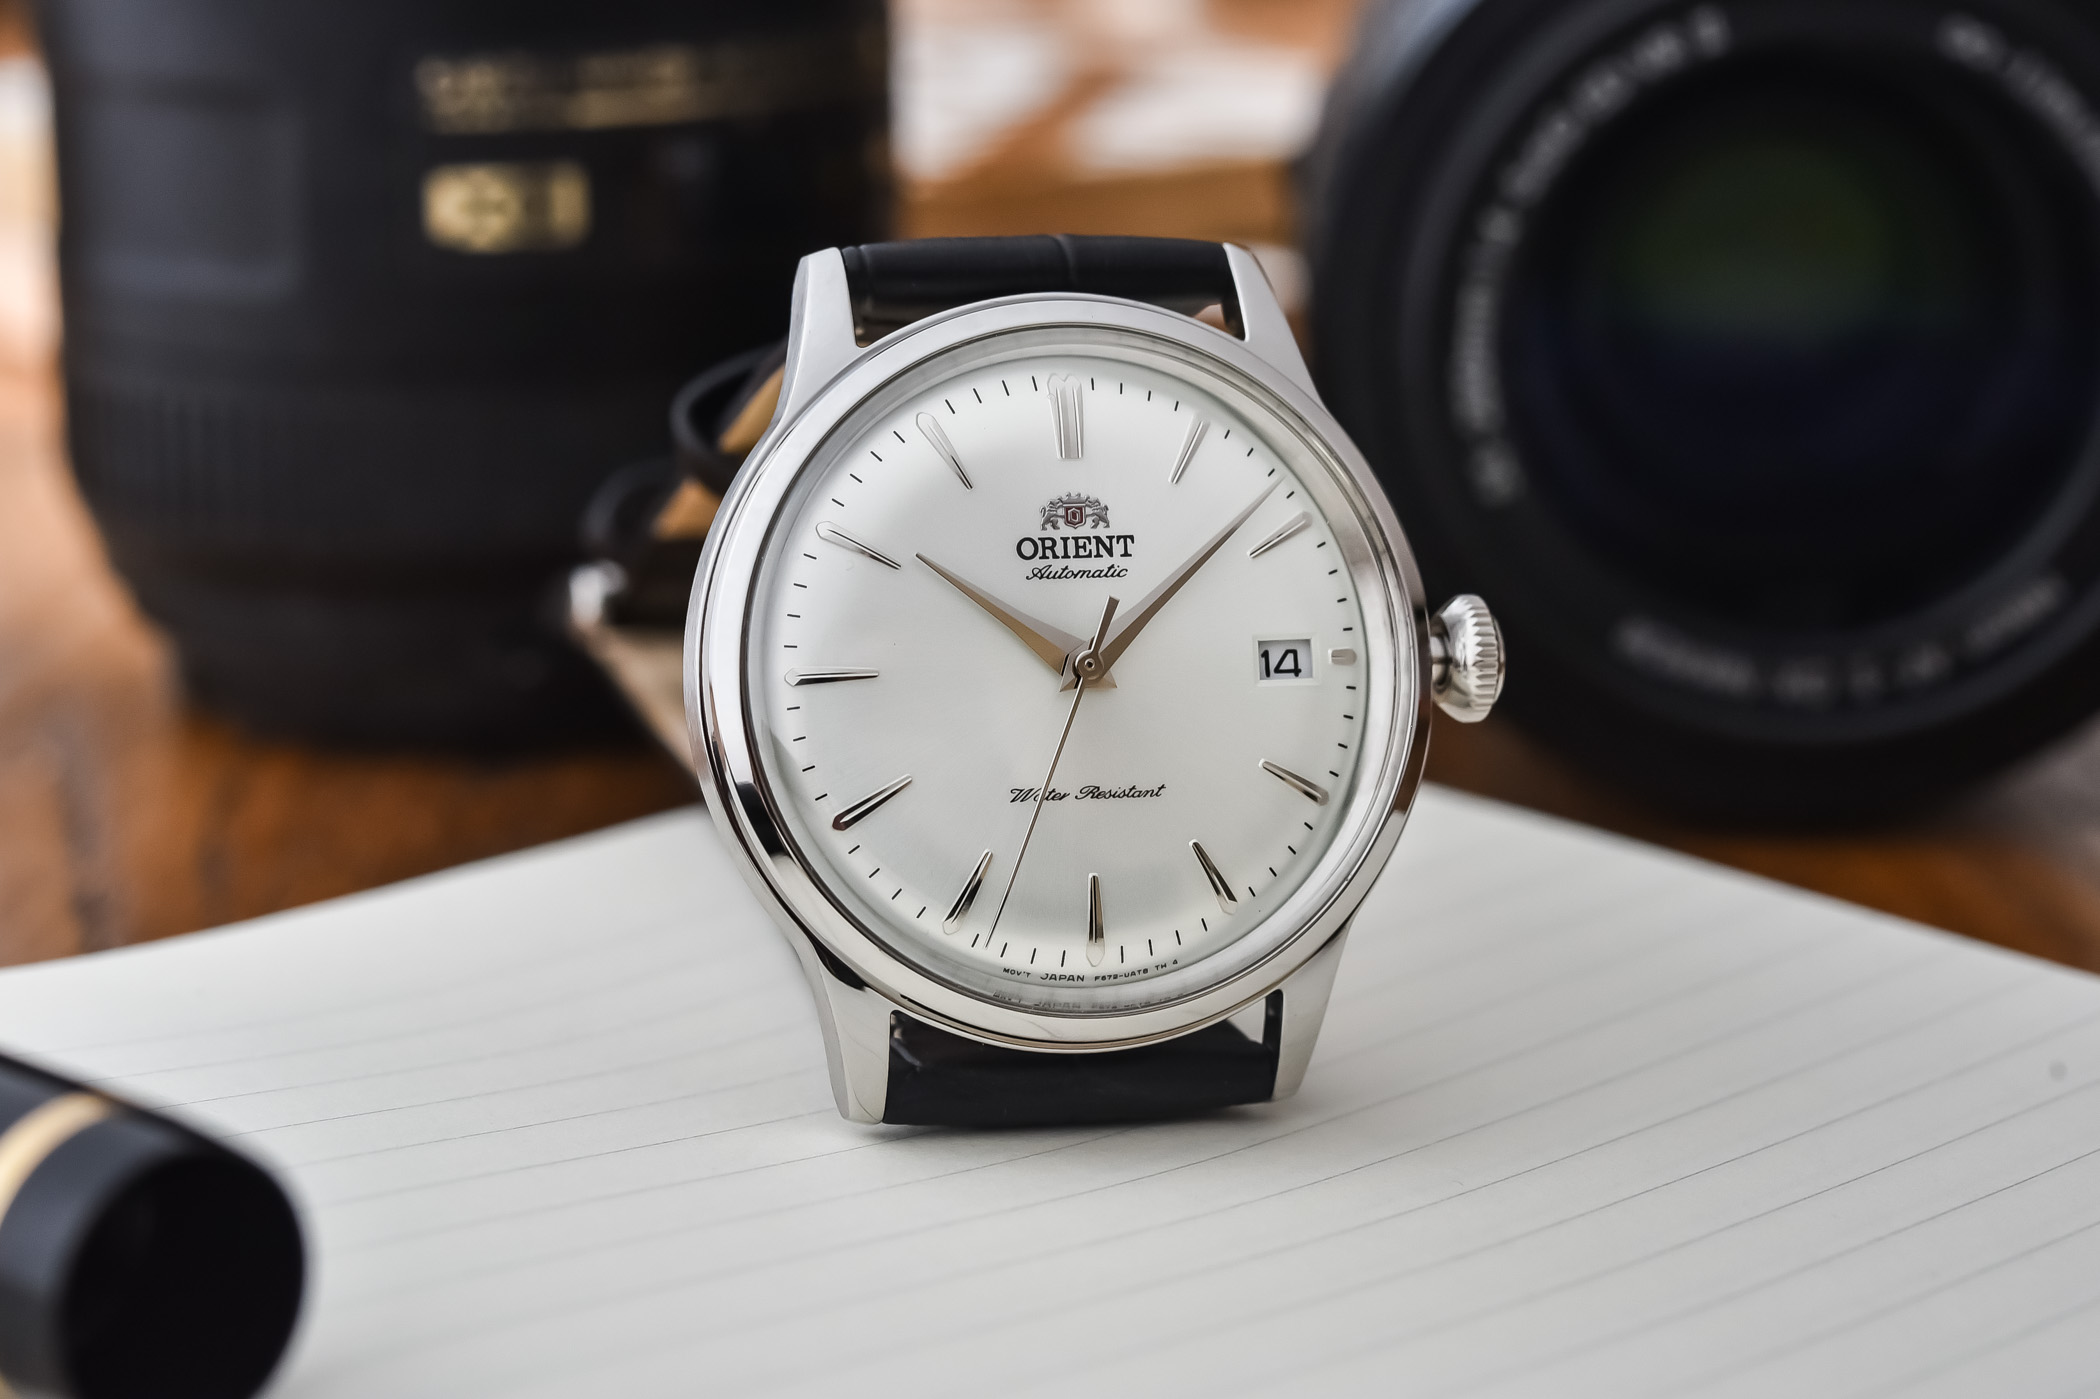 Orient Bambino 38 - Value Proposition Review